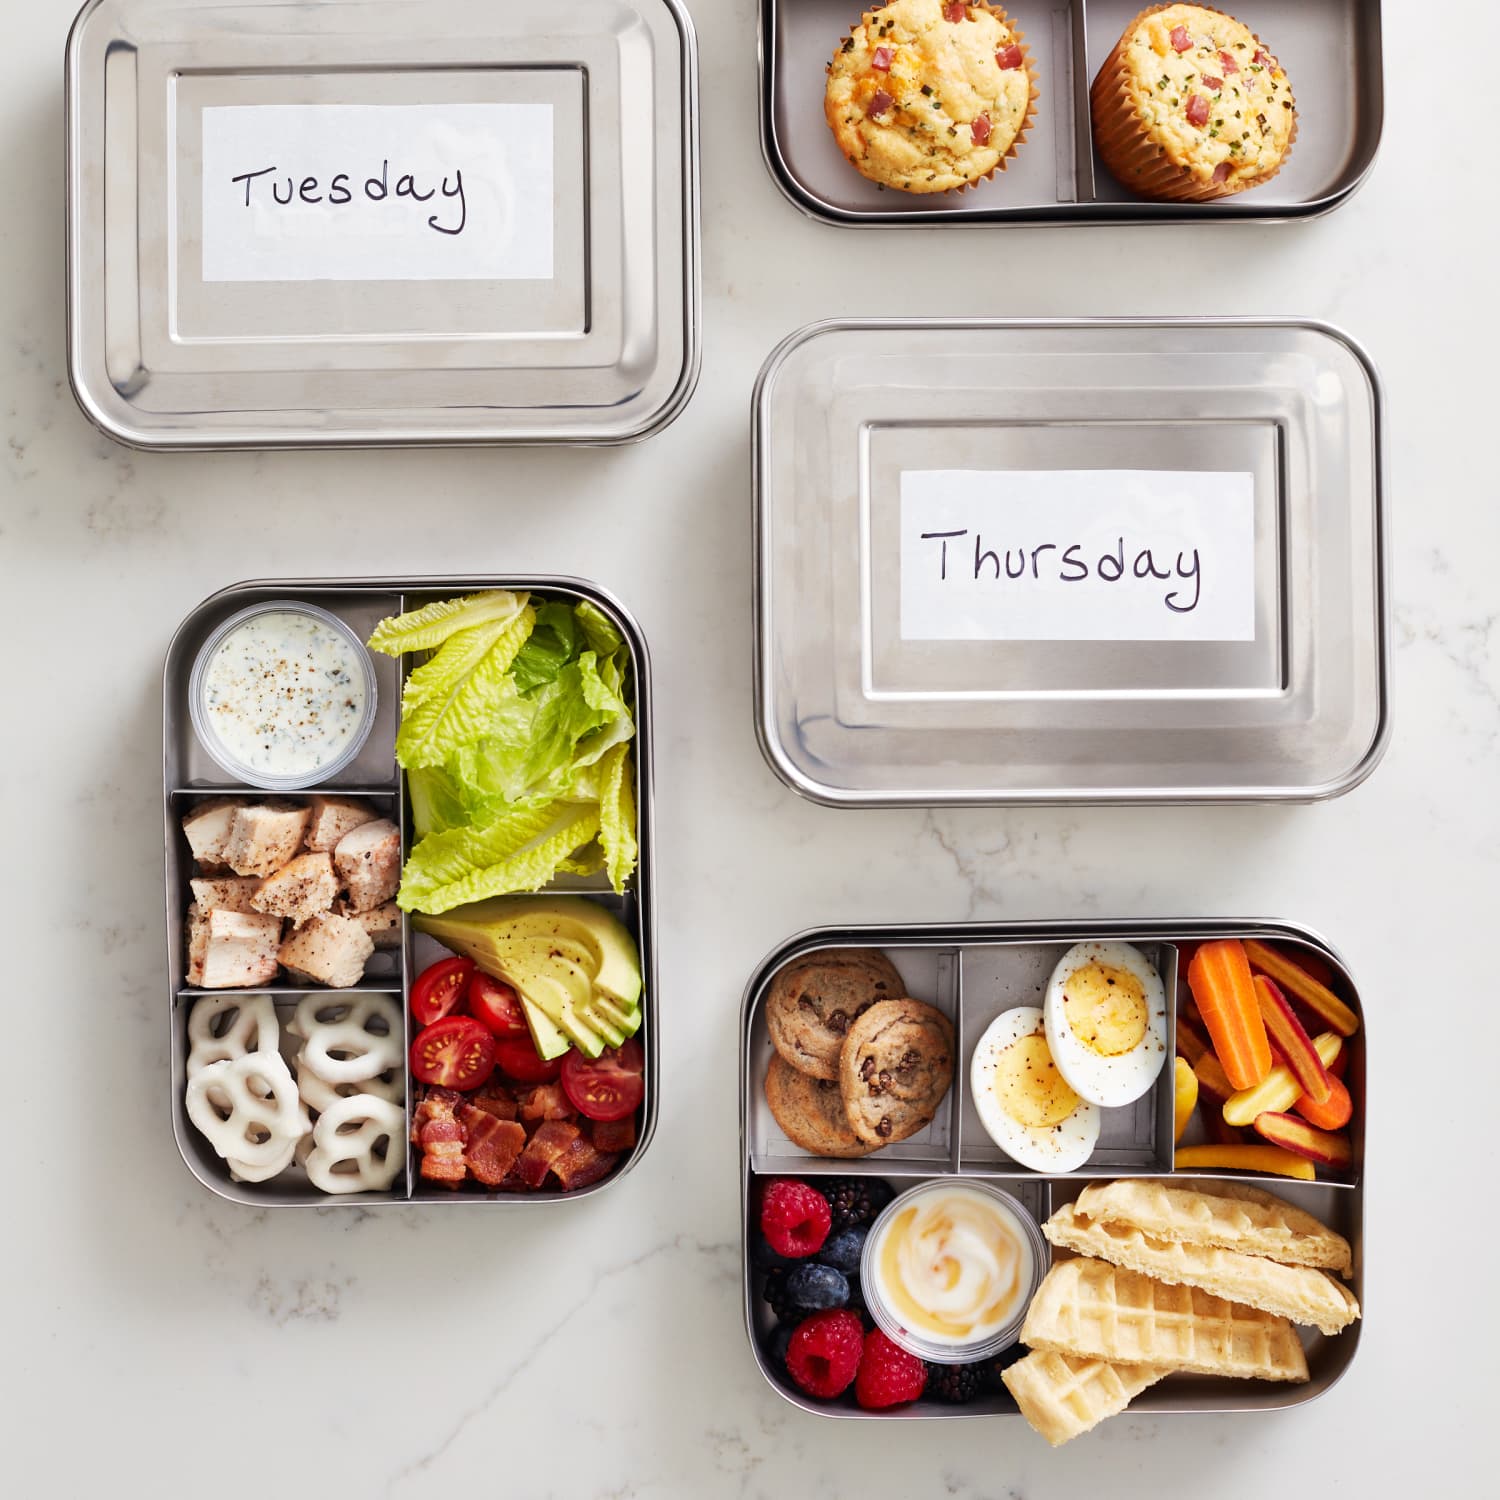 Toddler Lunch Meal Prep for the Week